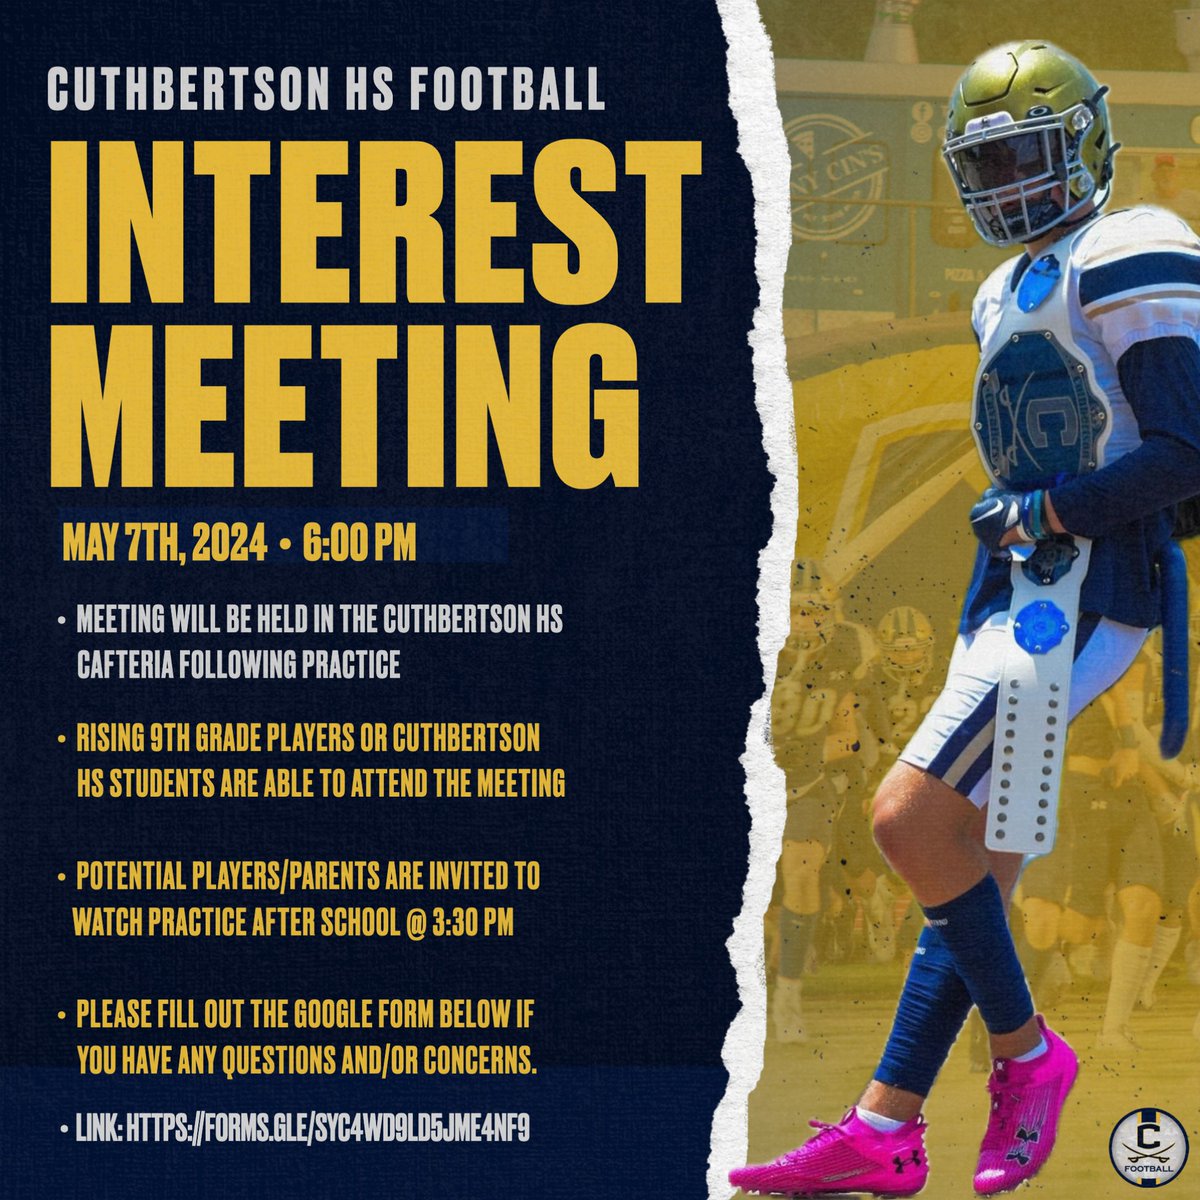 Cuthbertson Football will be holding an interest meeting for all RISING 9TH GRADE players on Tuesday, May 7th @ 6:00 PM in the Cafeteria. Players and parents are invited to watch our spring ball practice that day before the interest meeting. Additionally, coaches ask you fill